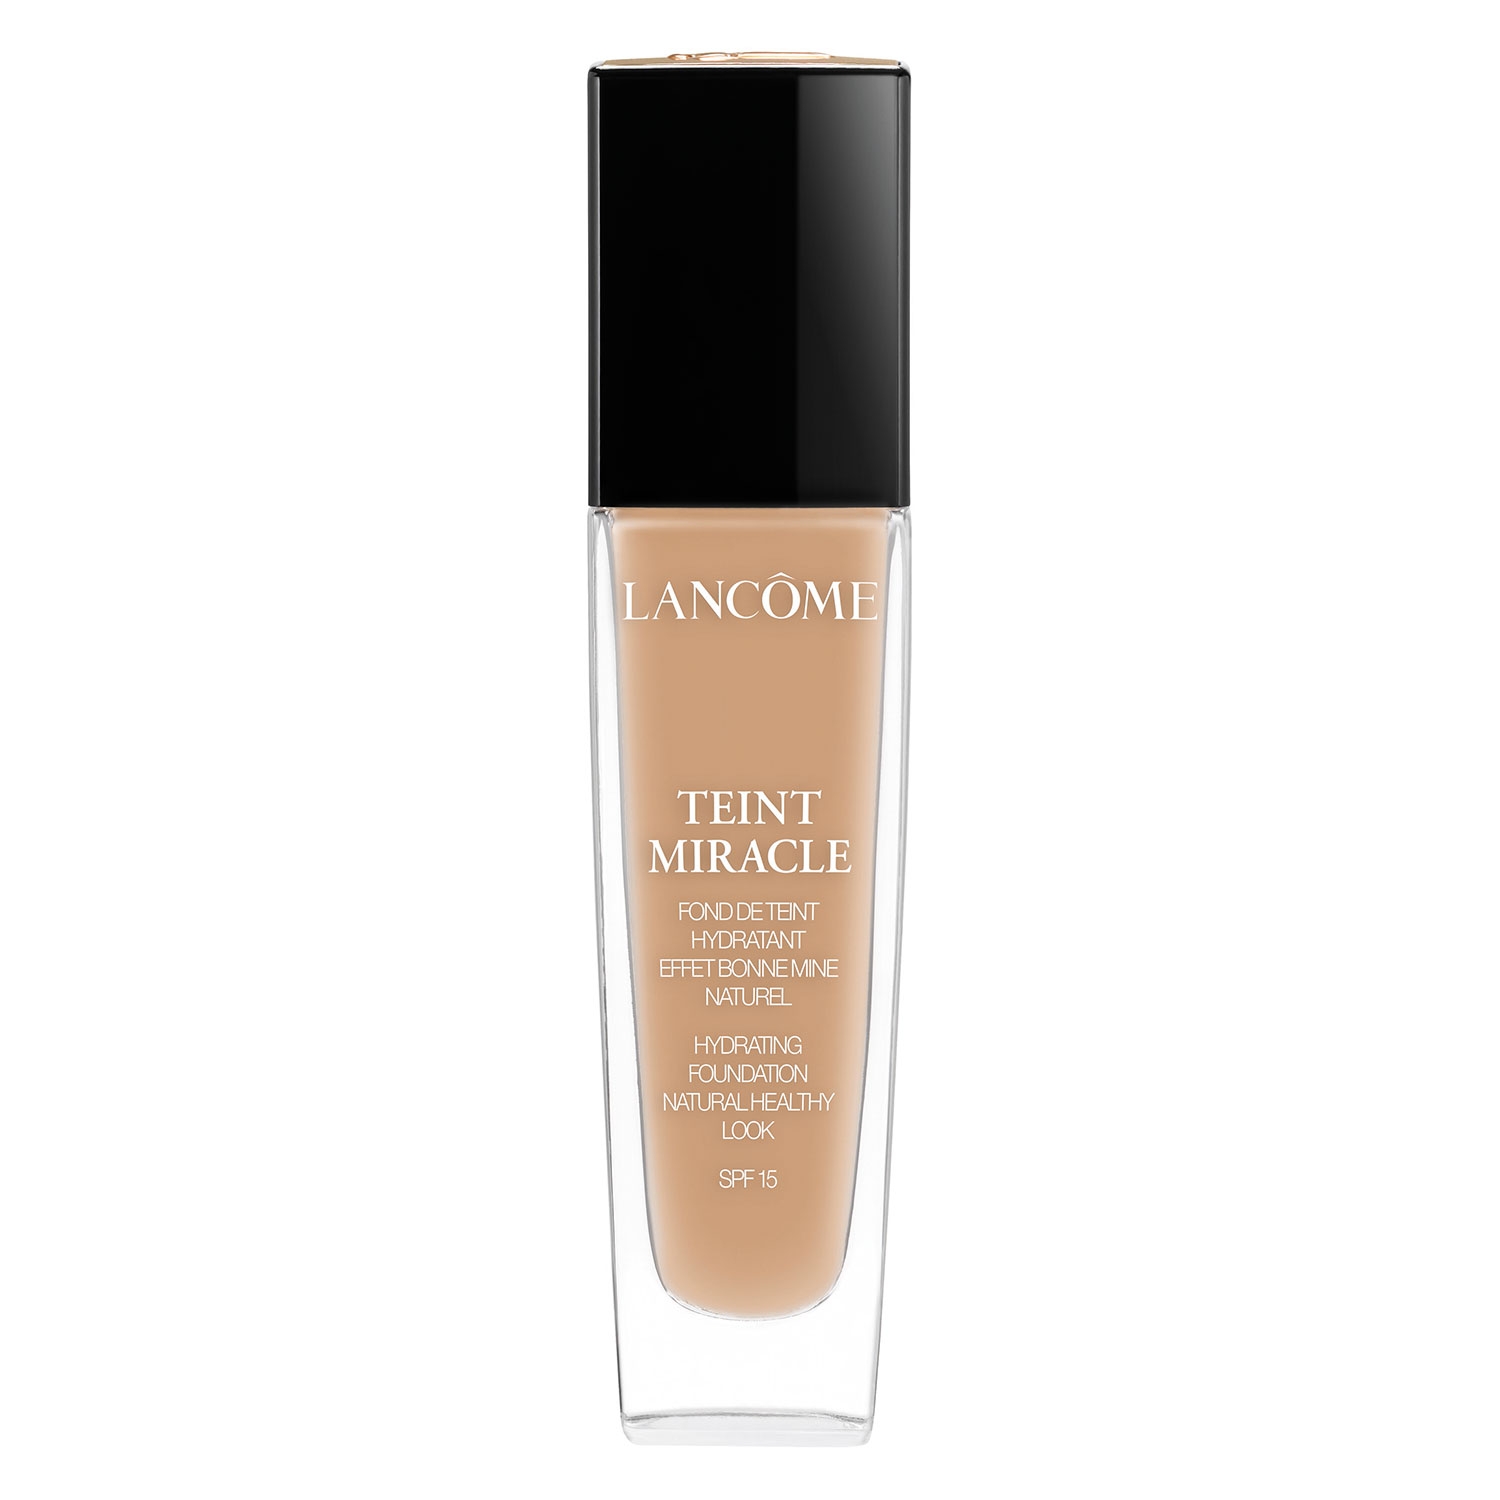 Product image from Teint Miracle - Fluide Beige Noisette 05